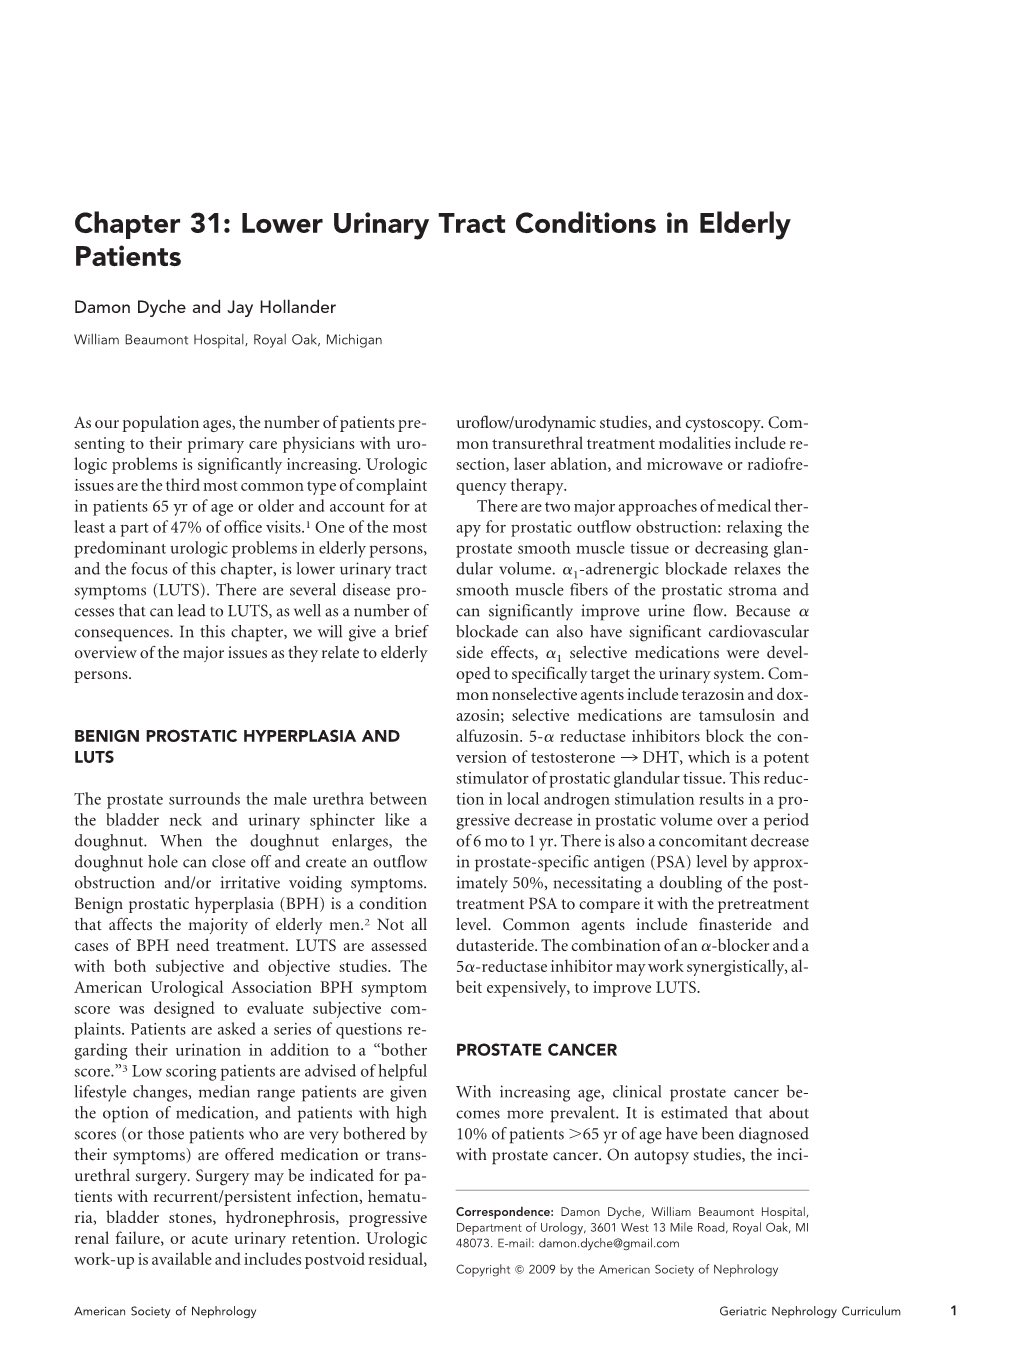 Chapter 31: Lower Urinary Tract Conditions in Elderly Patients